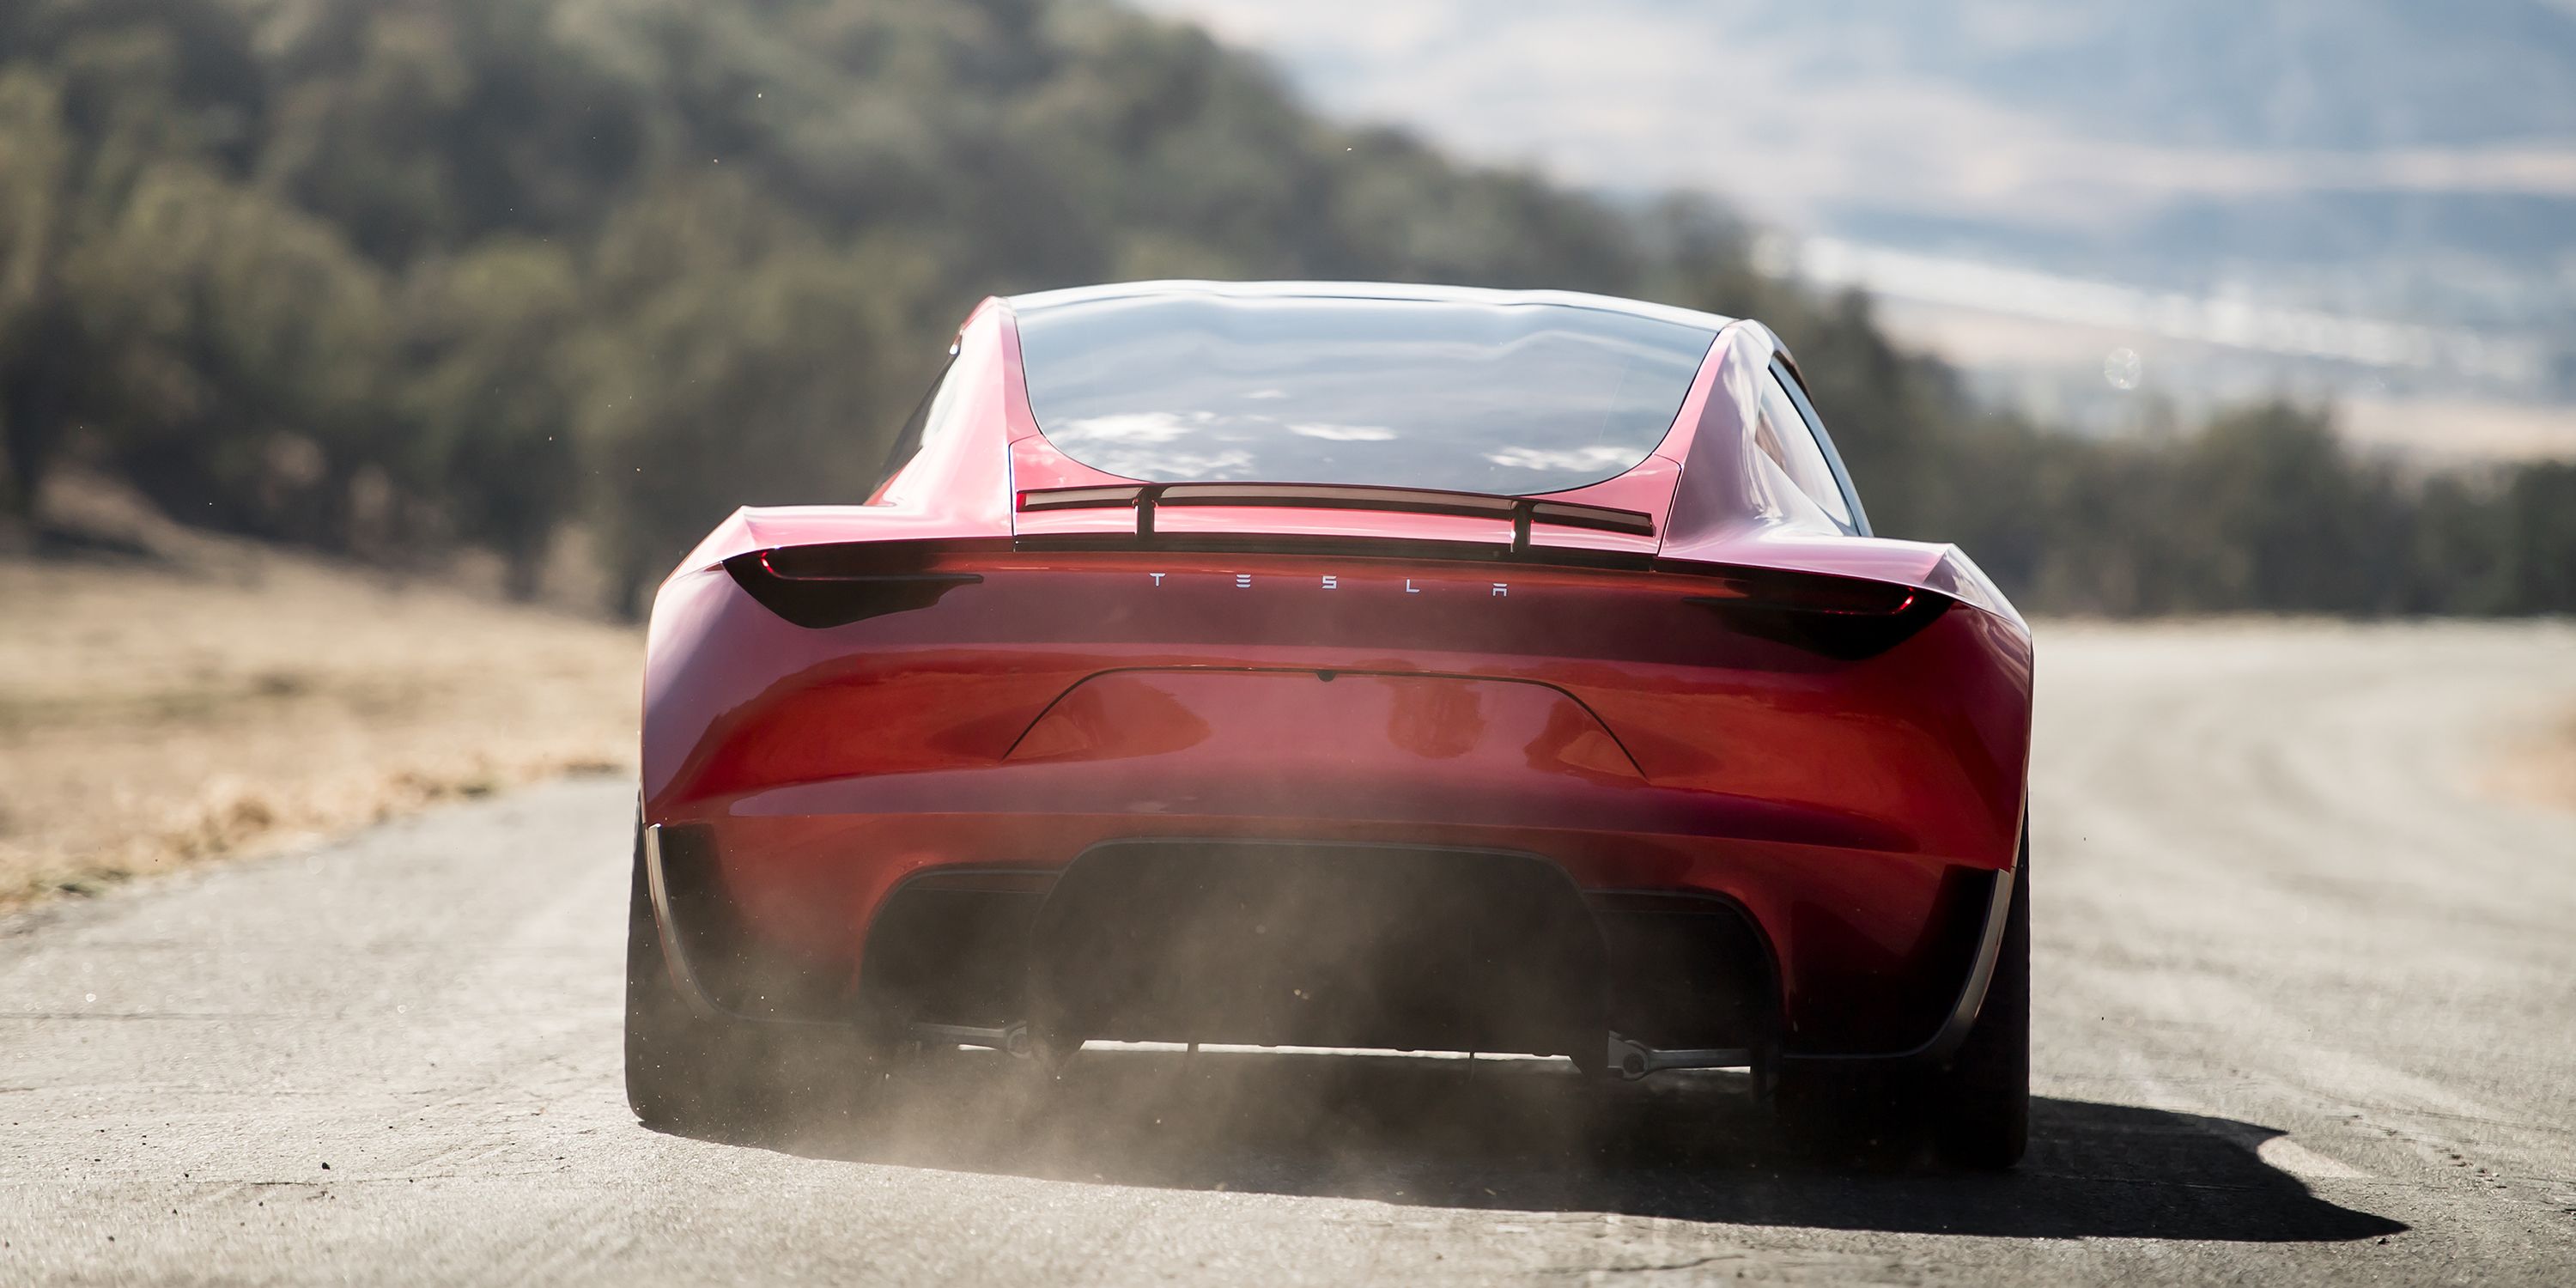 Does the New Tesla Roadster Really Have 7,000+ LB-FT of Torque?